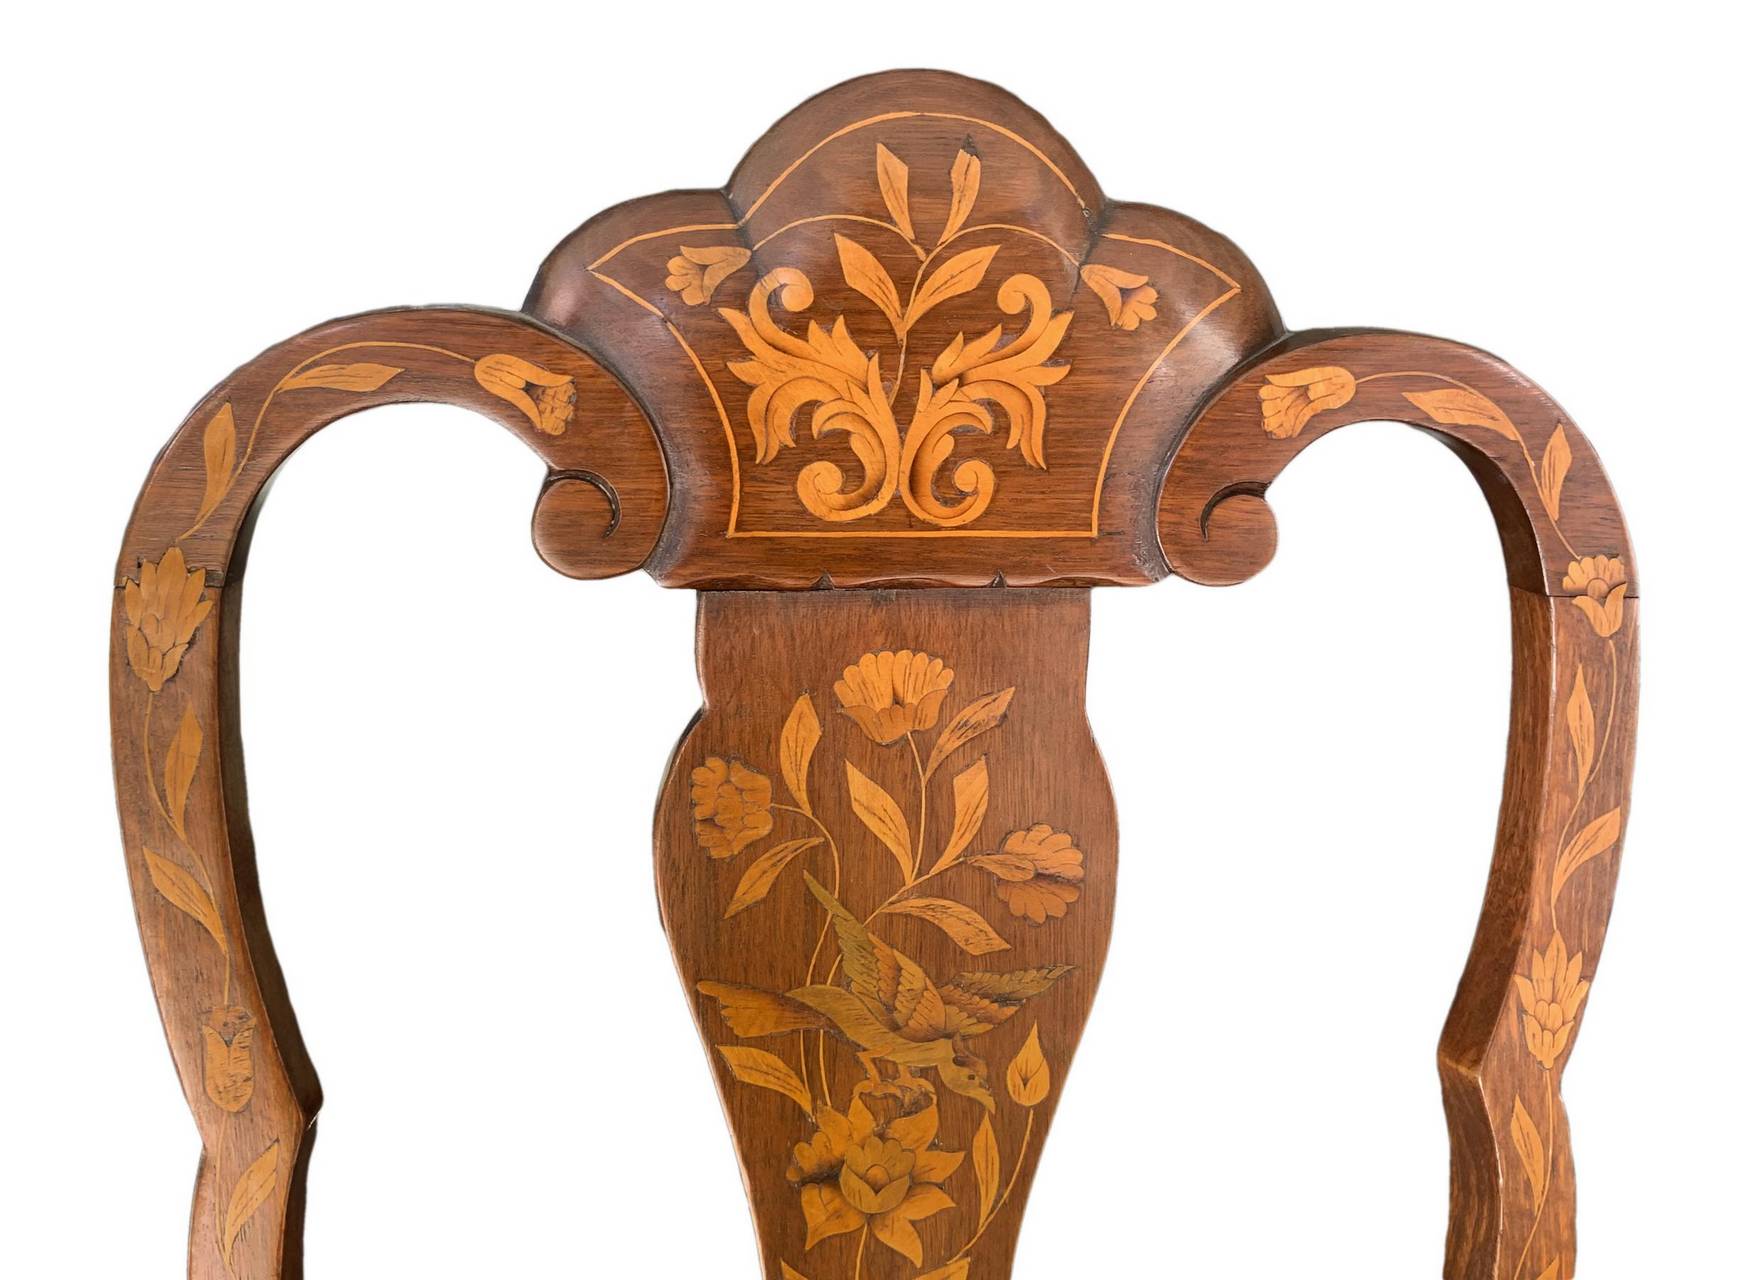 Group of 6 chairs and 2 headtables, nineteenth century, Holland. With floral inlays in light woods o - Image 6 of 6